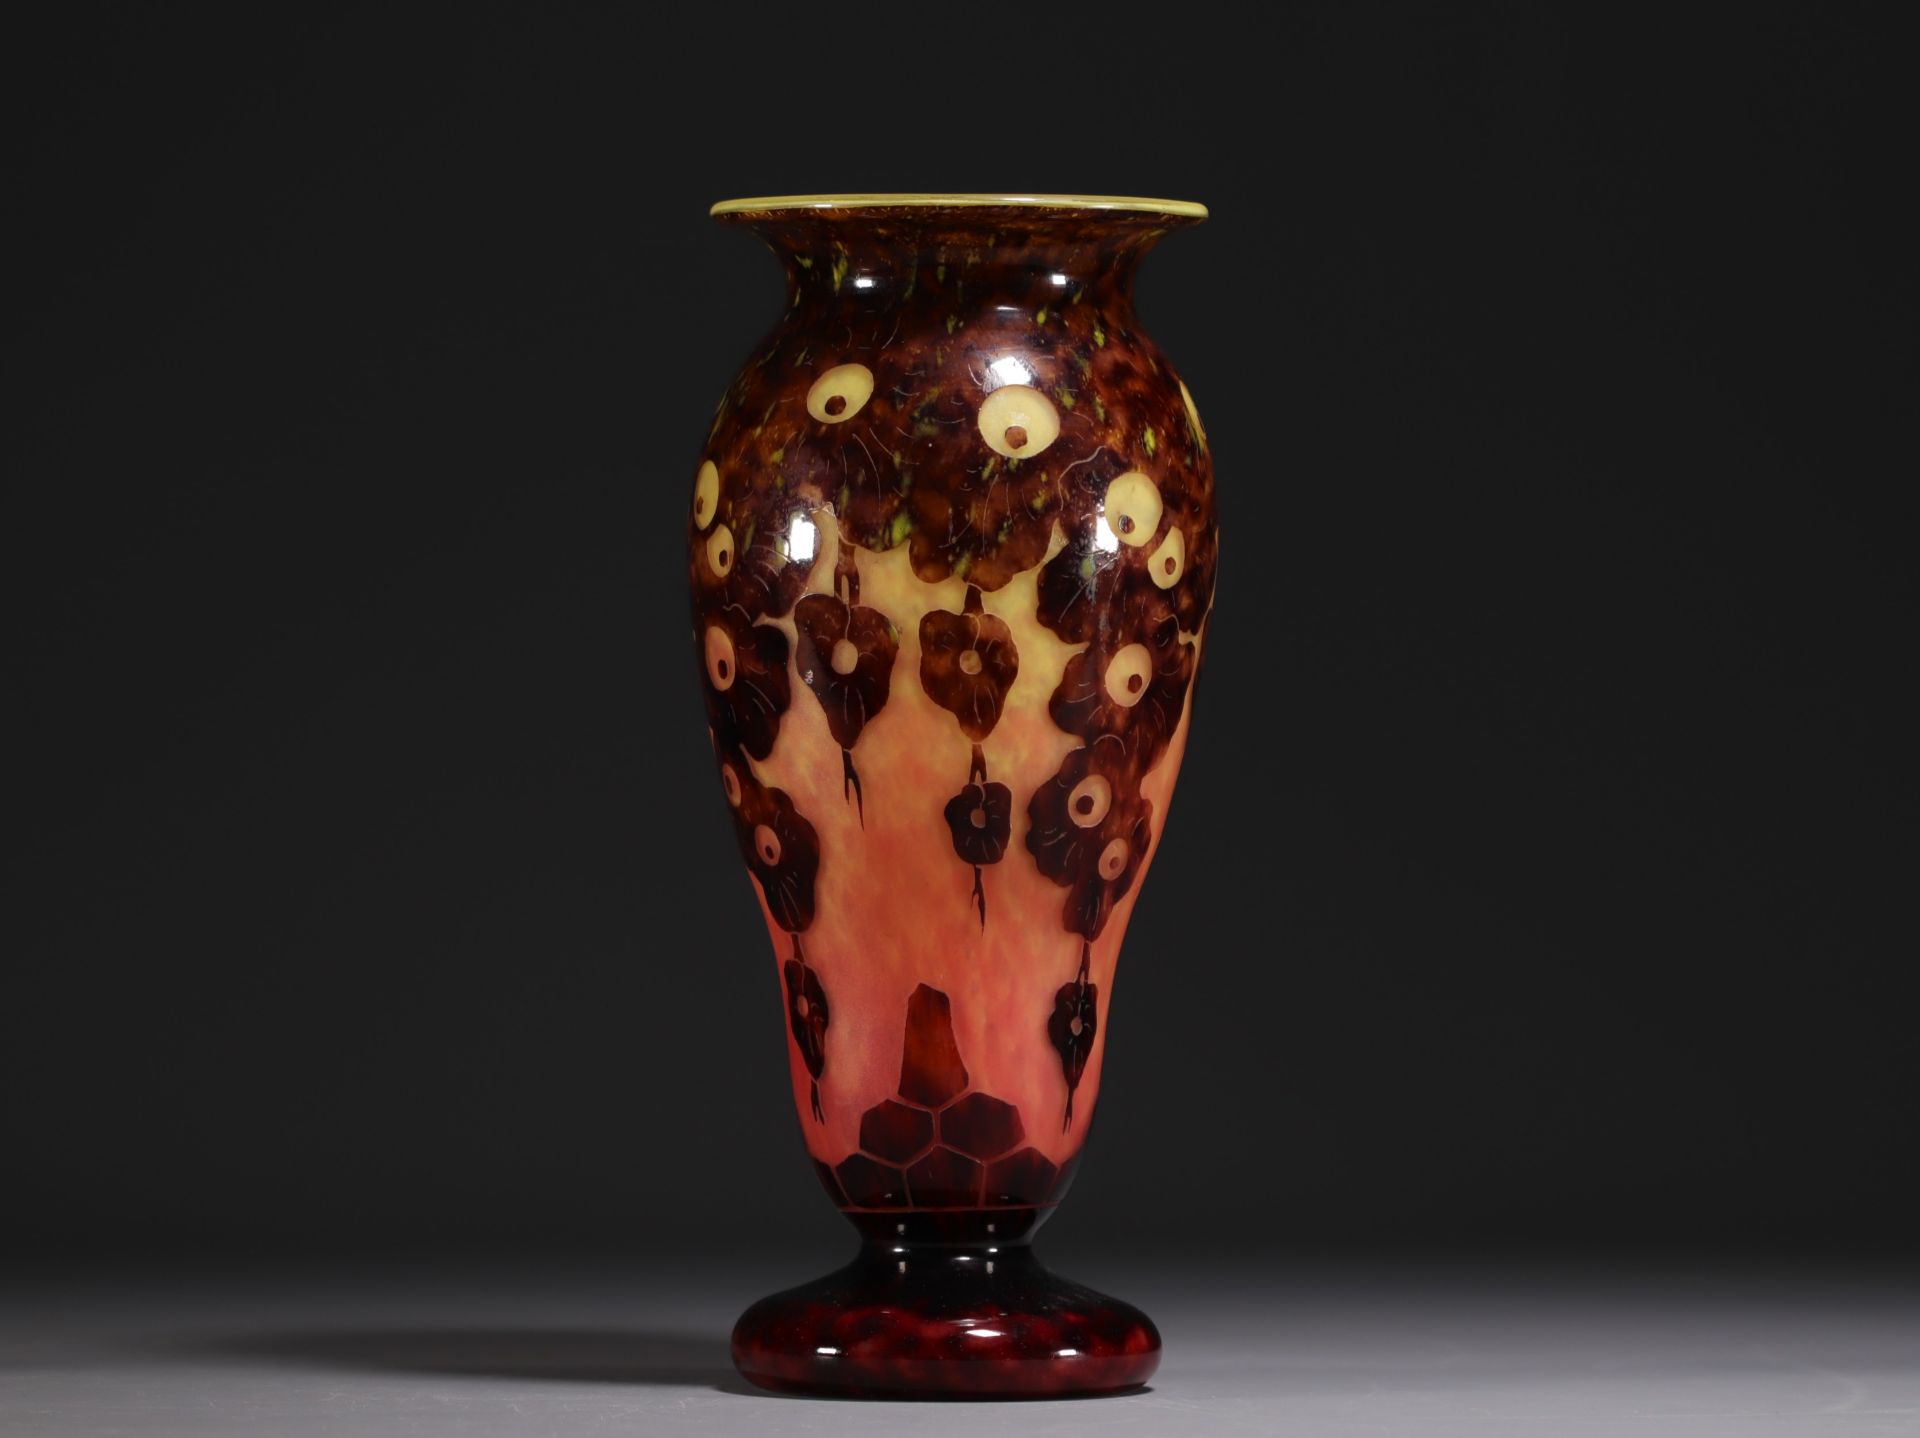 Le Verre Francais - Acid-etched multi-layered glass vase with oak decor, signed on the base. - Image 3 of 4